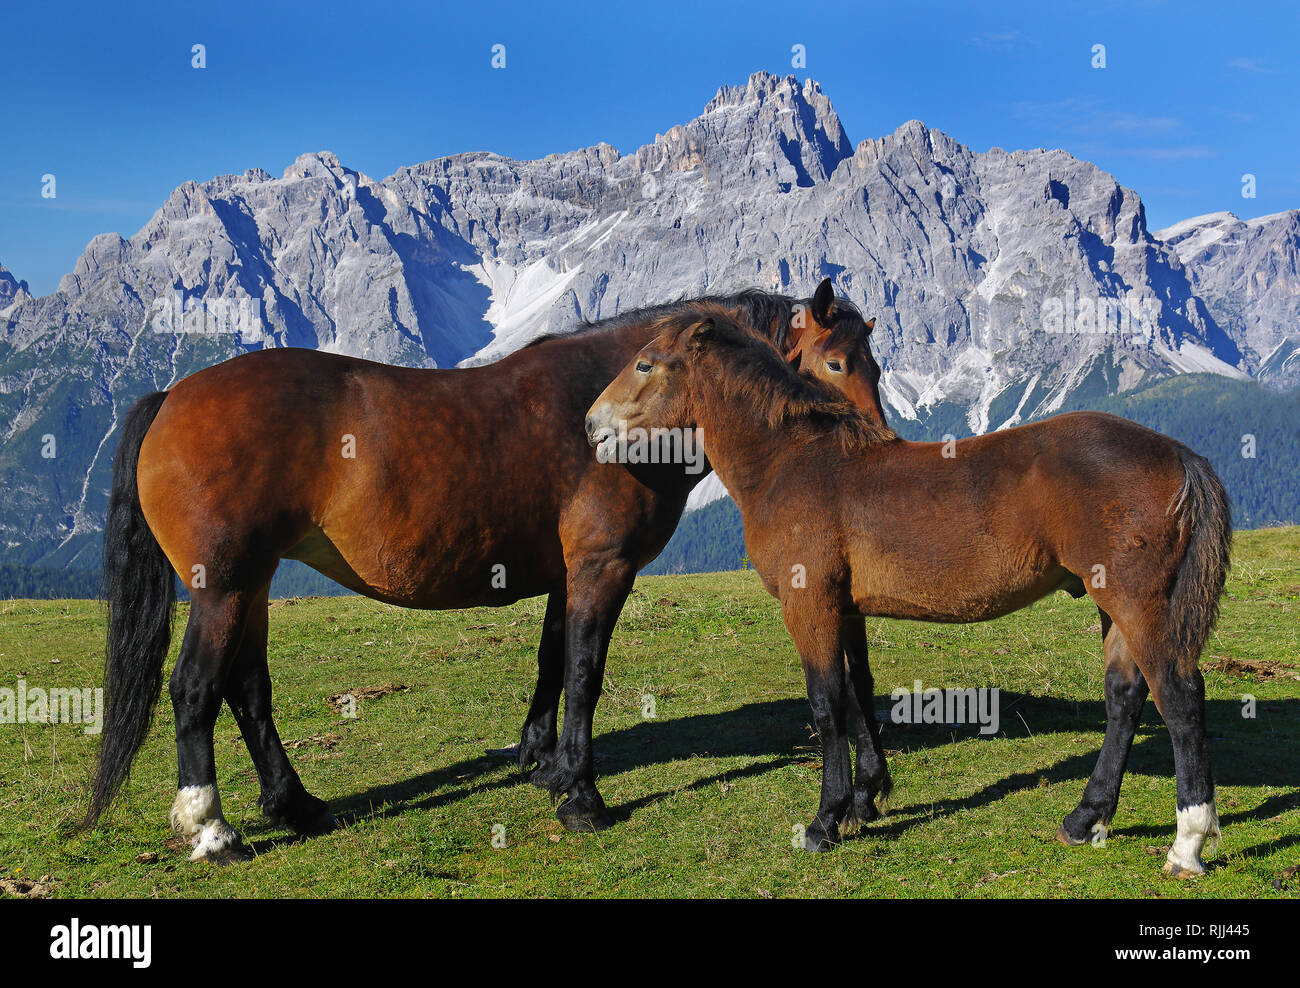 Italian Heavy Draft, Rapid Heavy Draft. Bay mare and colt (5 month old) engaged in social grooming on an alpine meadow. Stock Photo